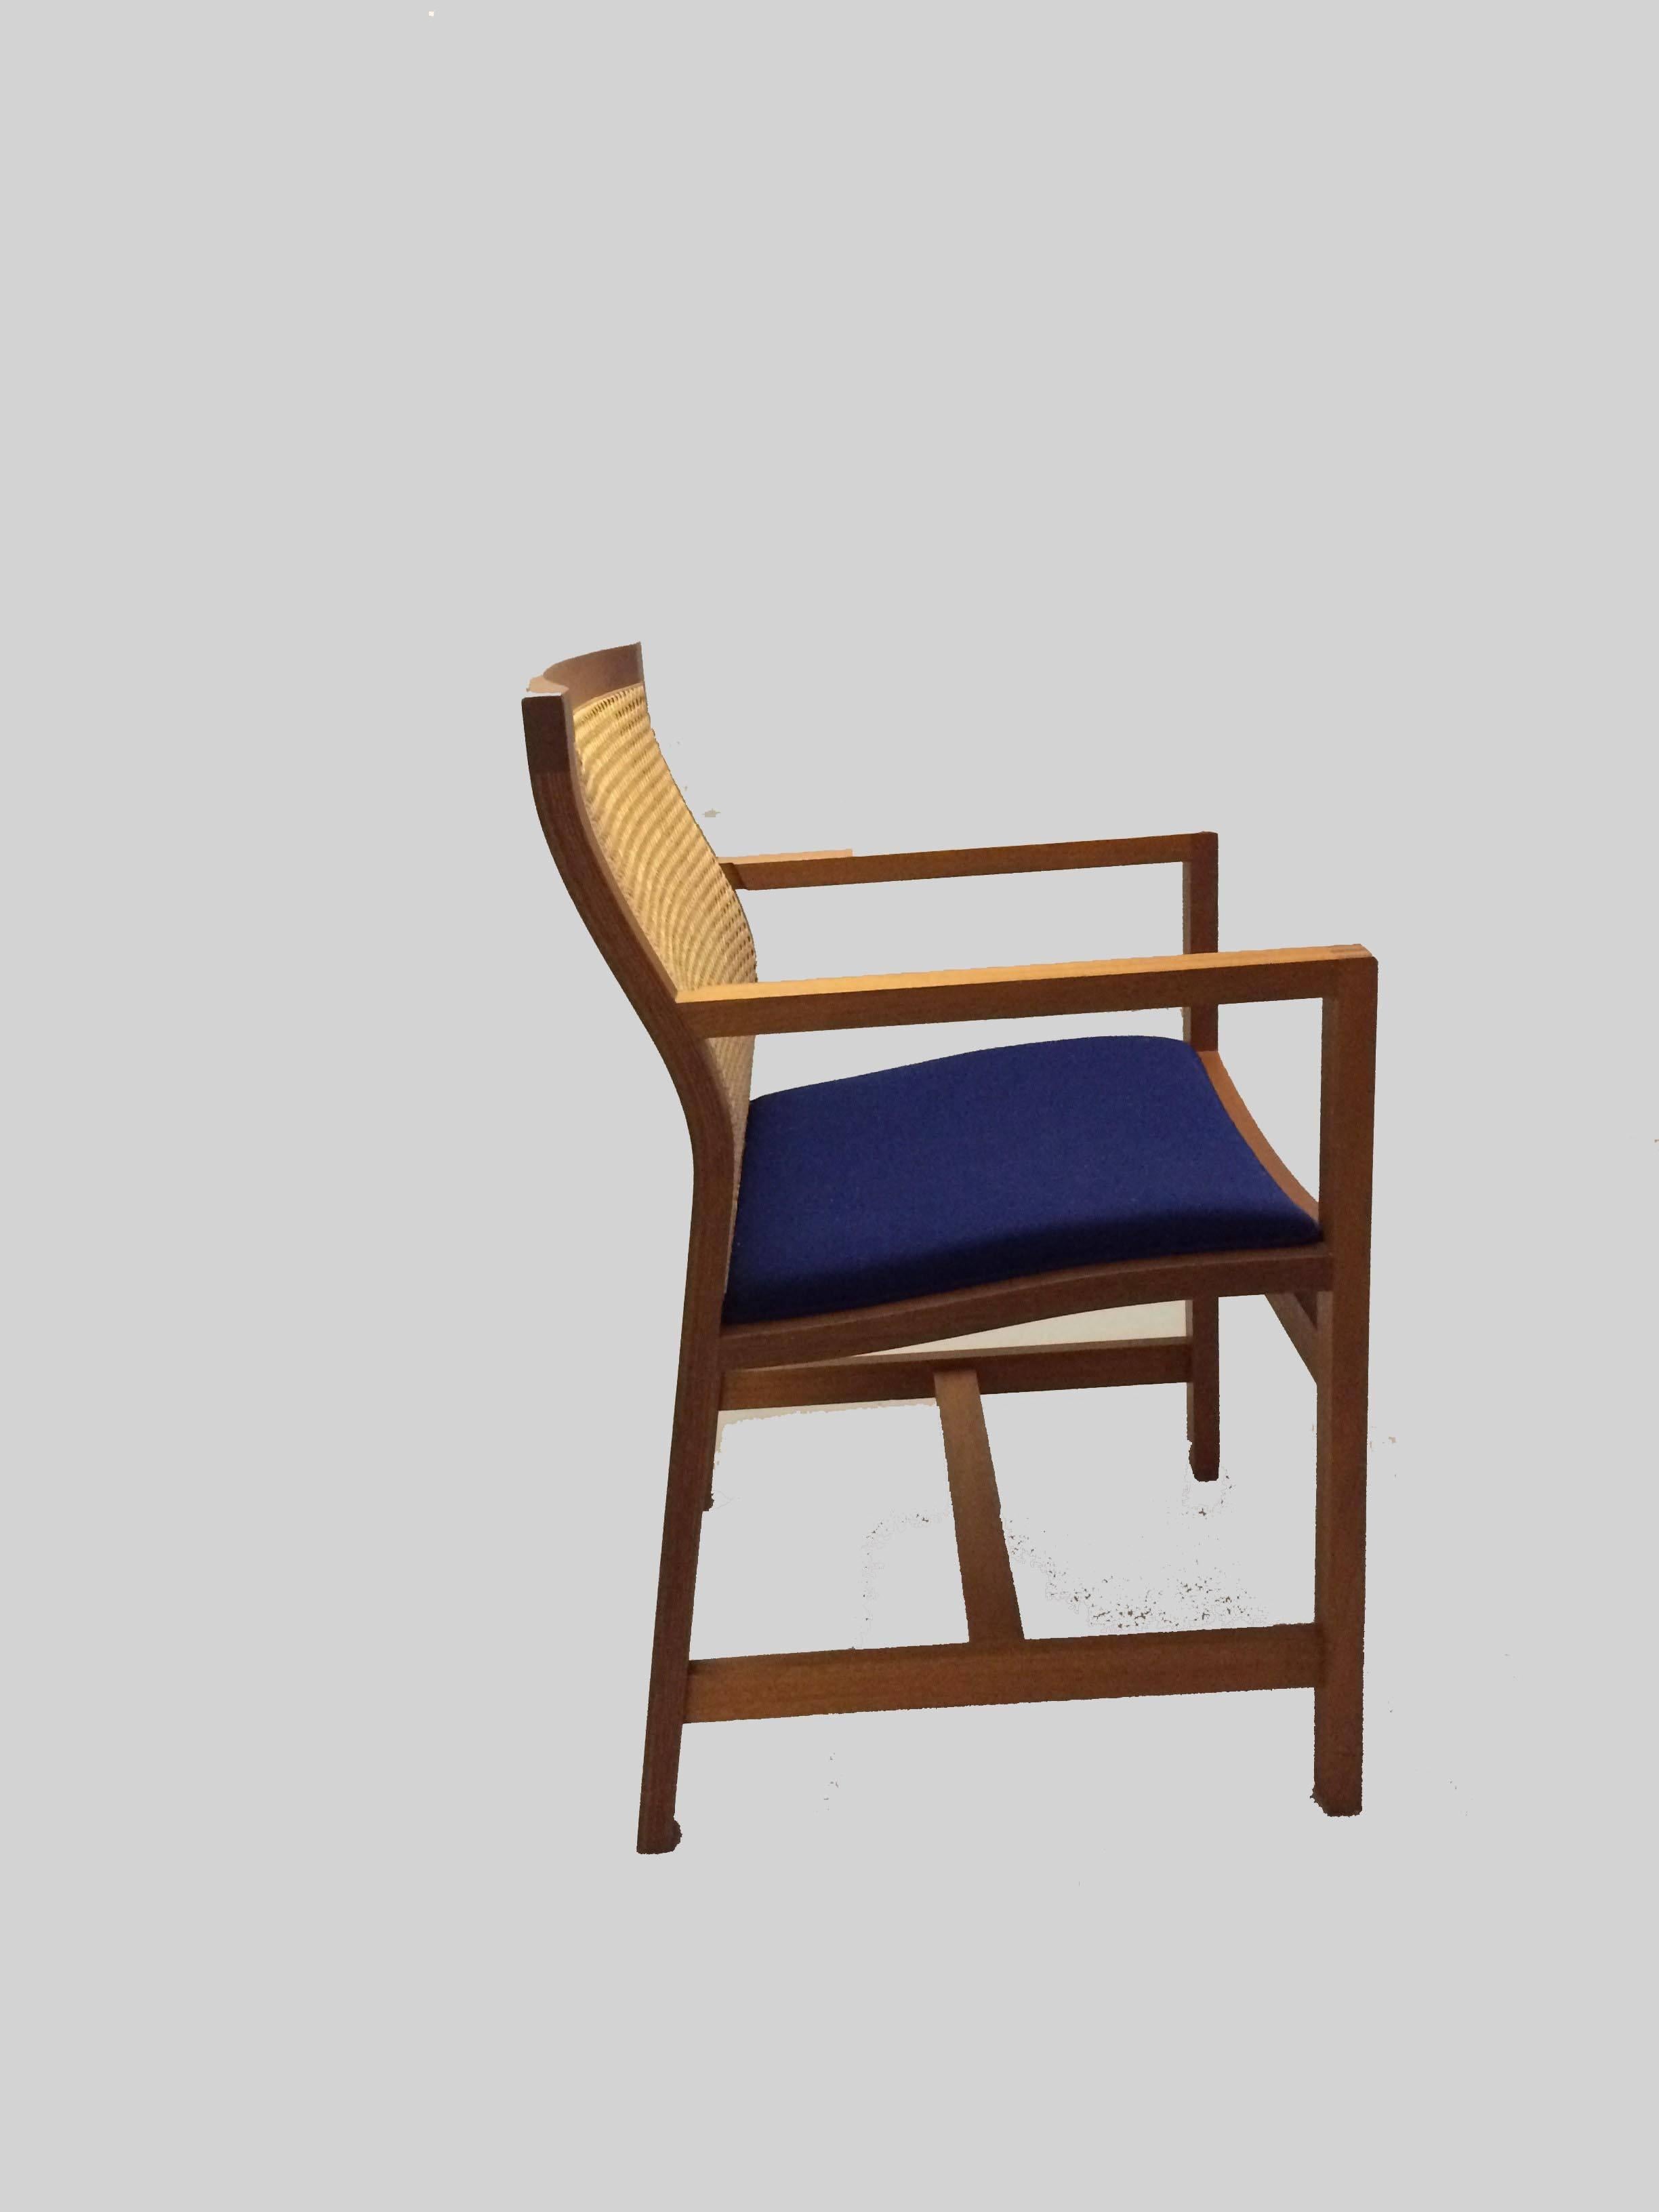 Rud Thygesen and Johnny Sørensen designed model 7512 for Fredericia Furniture A/S in 1981 as part of the Classic Kings Furniture series, which has been designed since 1969, named such because the Danish King Frederik IX received some of the models